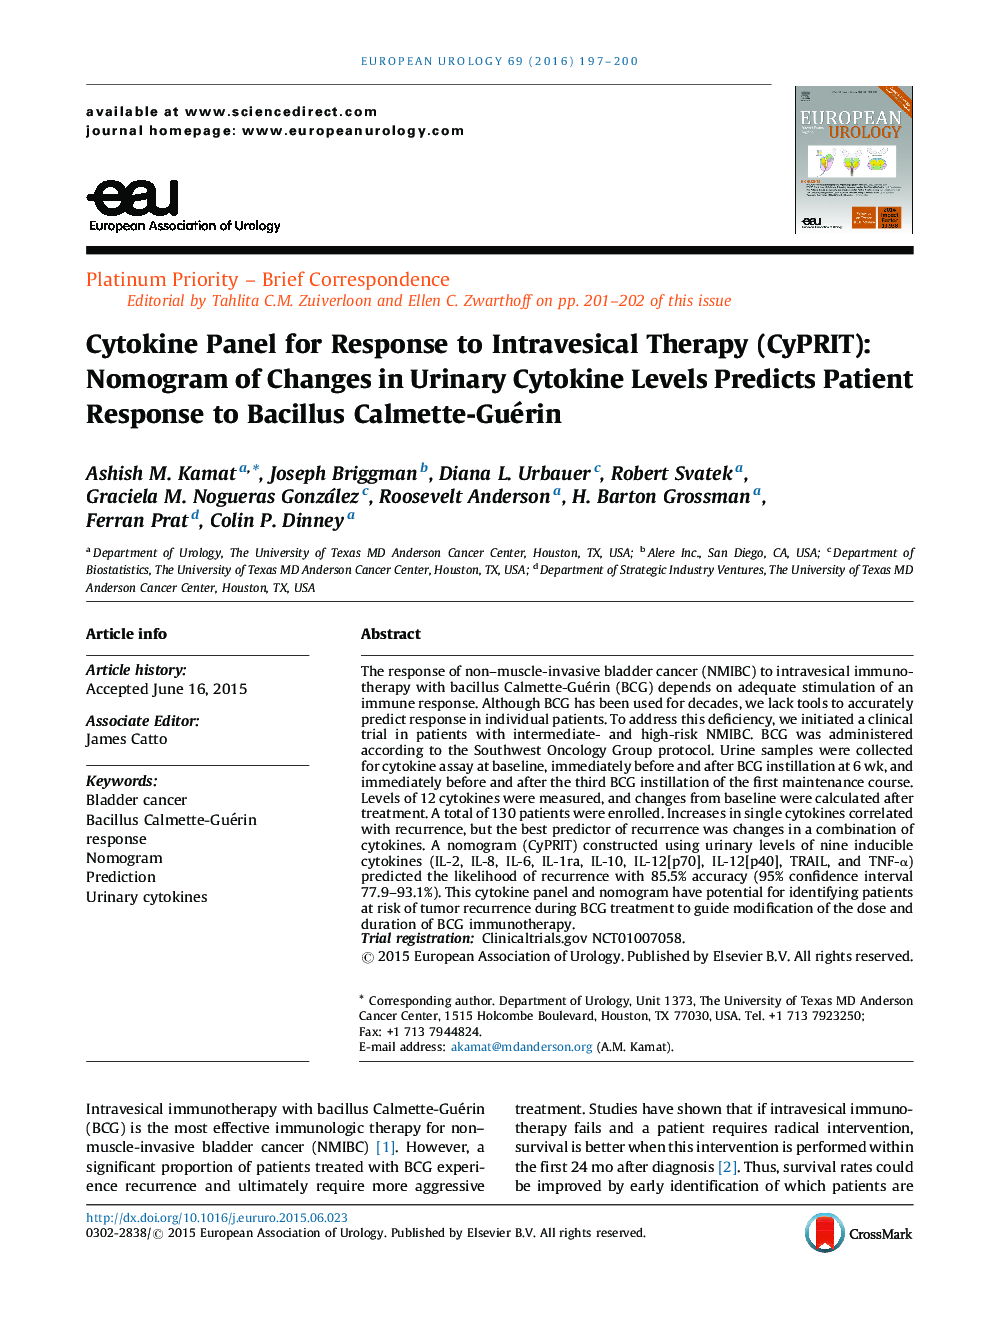 Cytokine Panel for Response to Intravesical Therapy (CyPRIT): Nomogram of Changes in Urinary Cytokine Levels Predicts Patient Response to Bacillus Calmette-Guérin